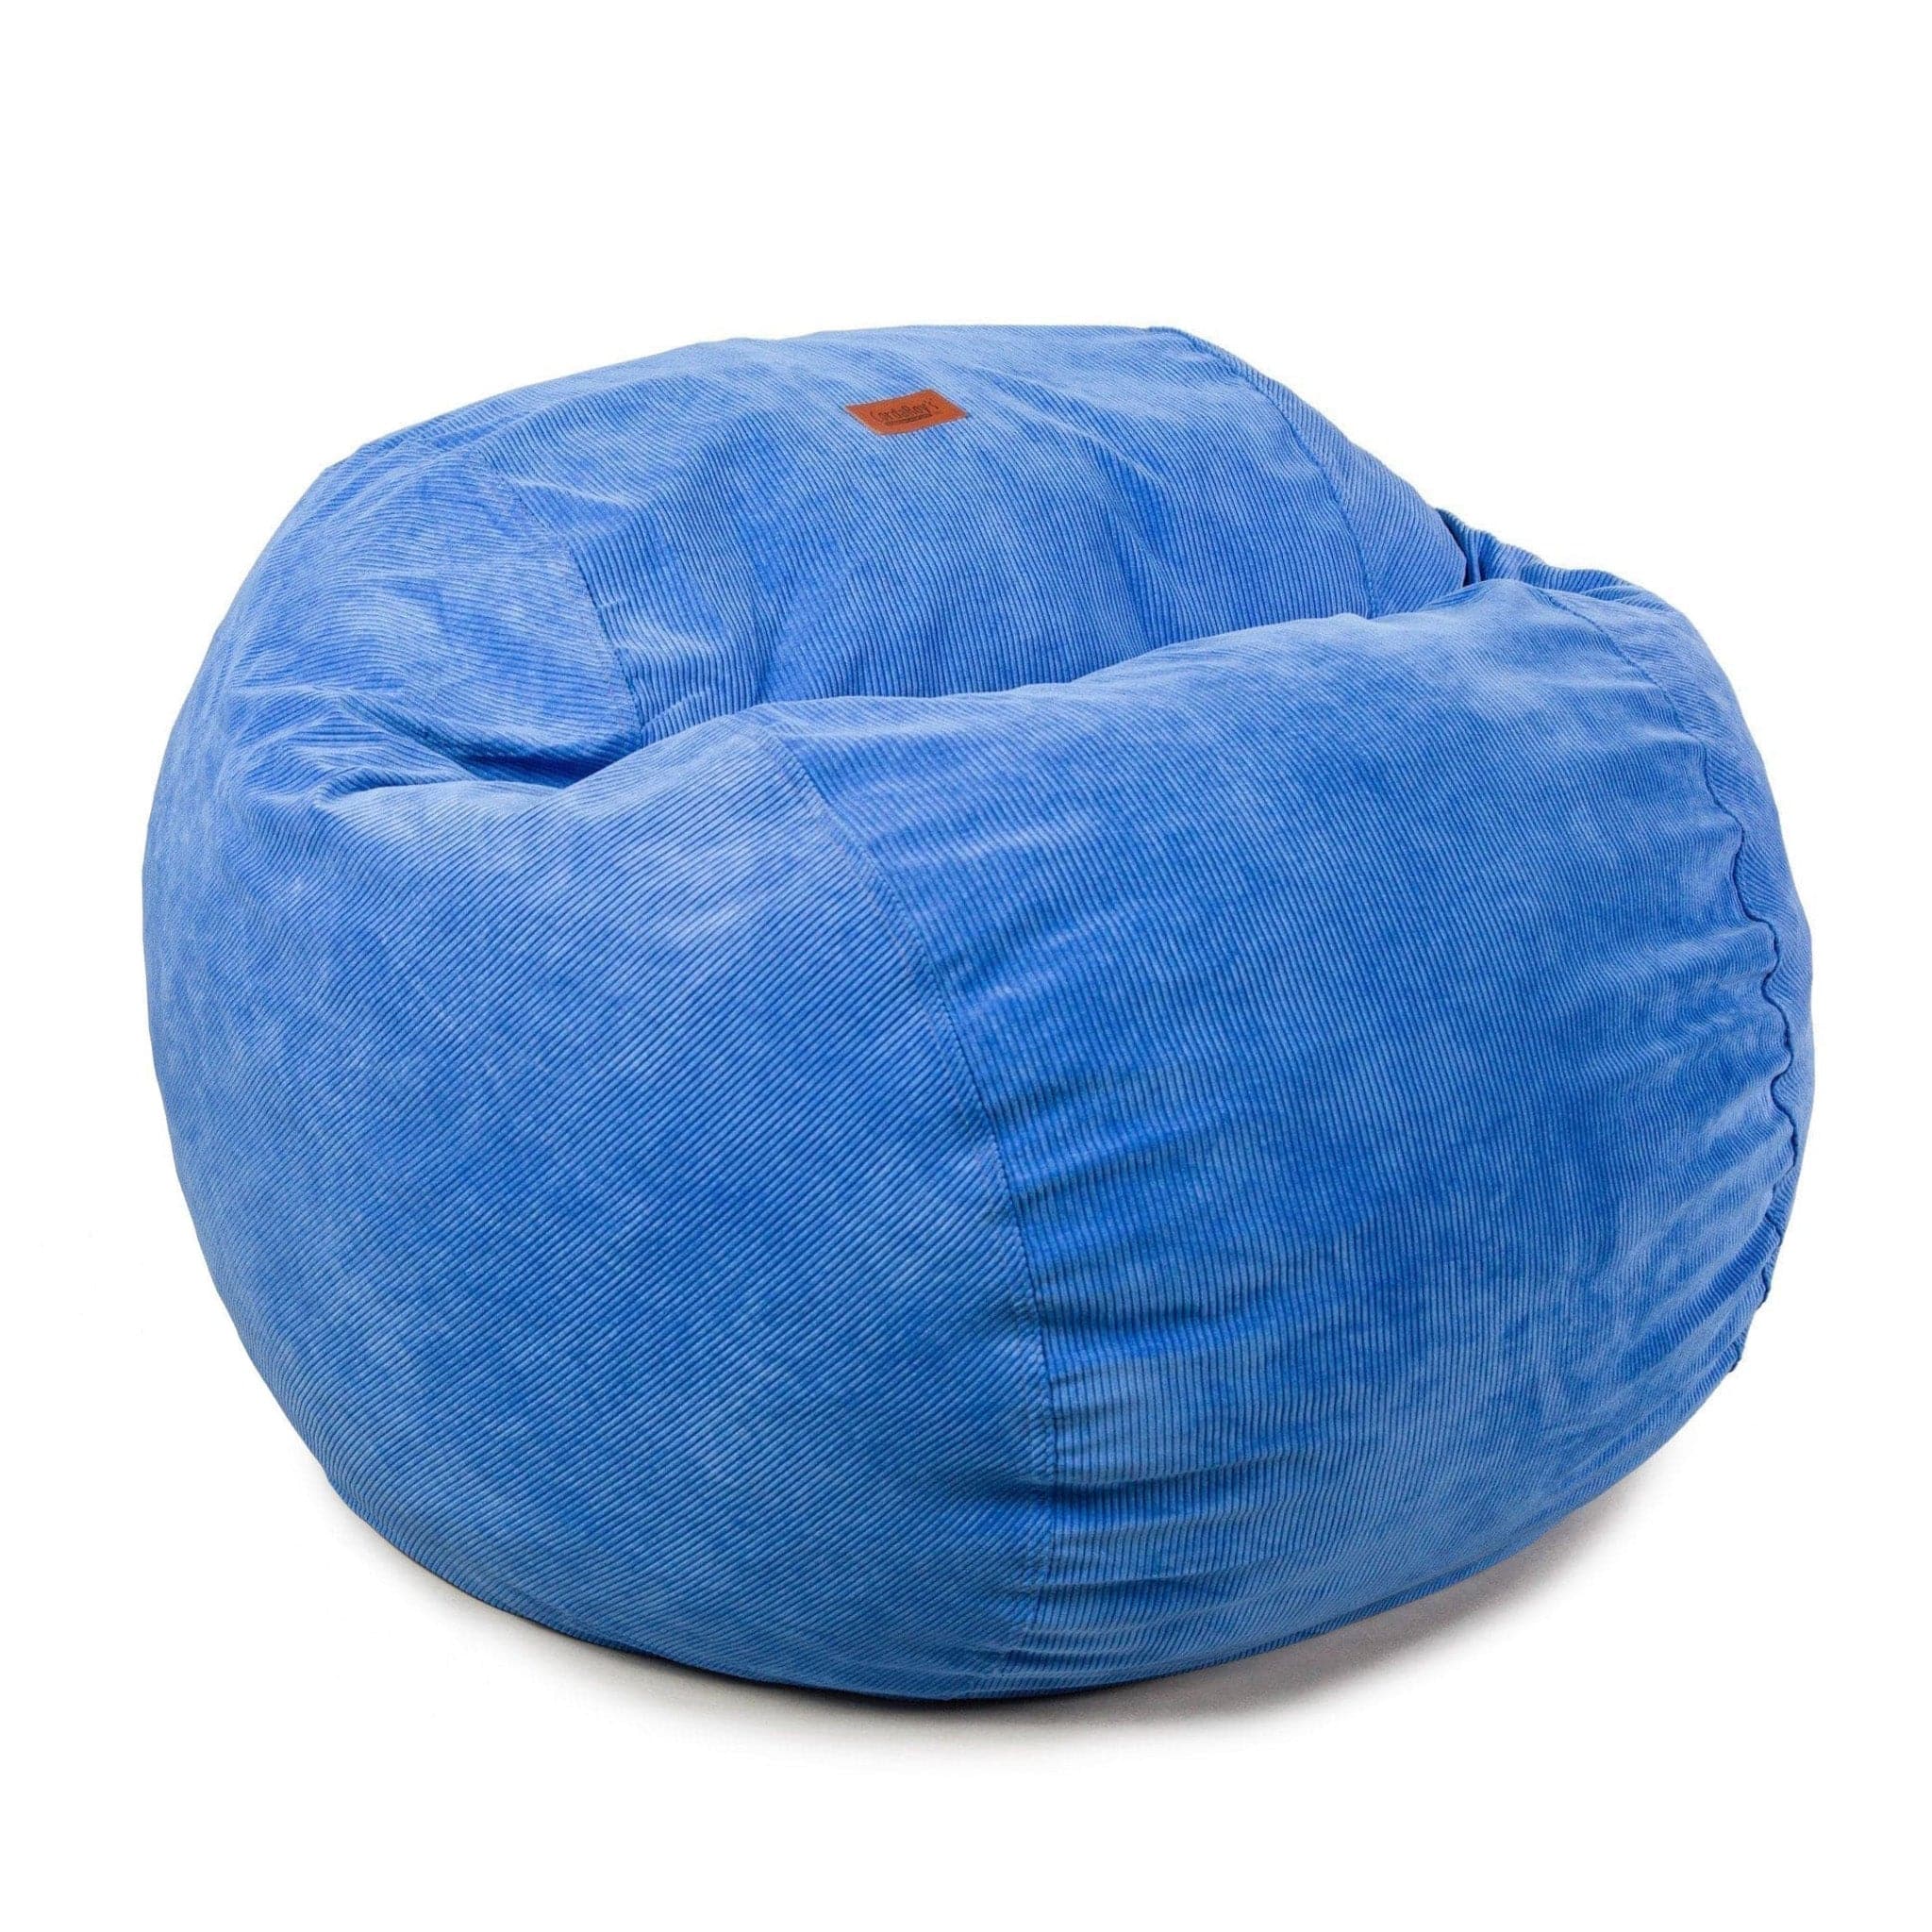 Cheapest Way To Fill Bean Bag Chair? - (Top 10 Options!)